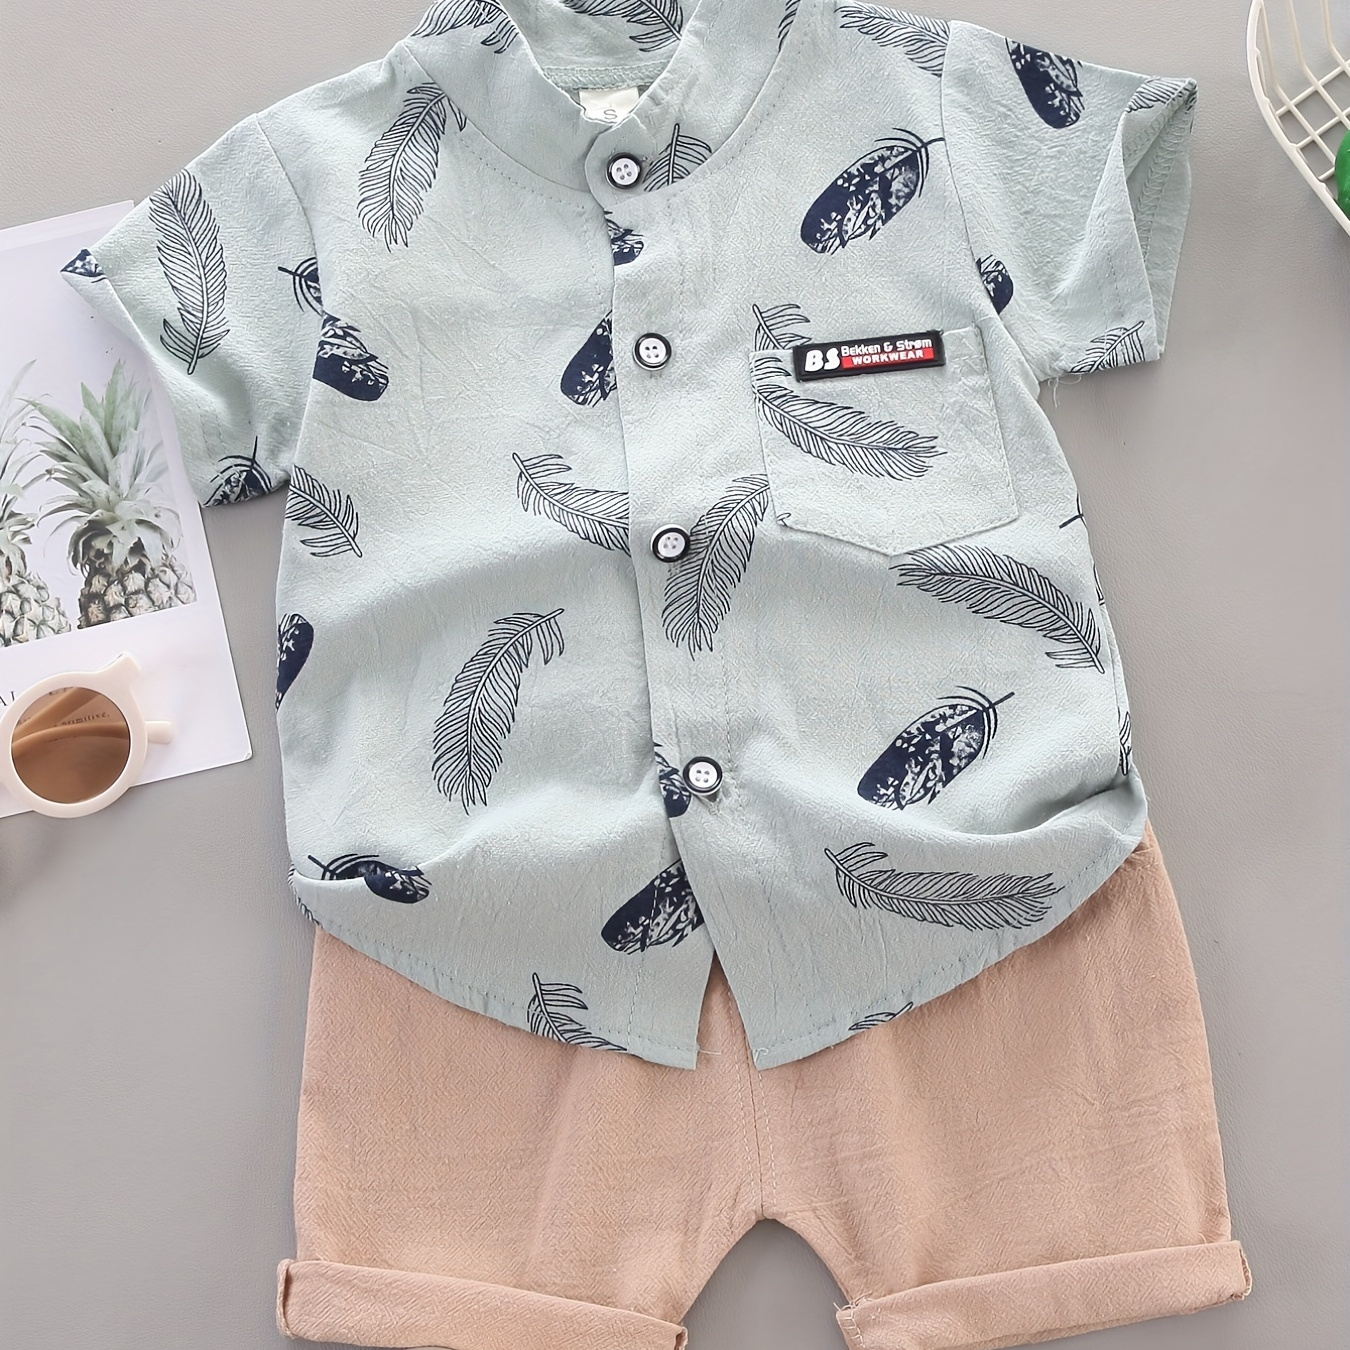 

Baby Boys Casual Outfit - Feather Pattern Short Sleeve Shirt & Shorts - Kids 2pcs Set